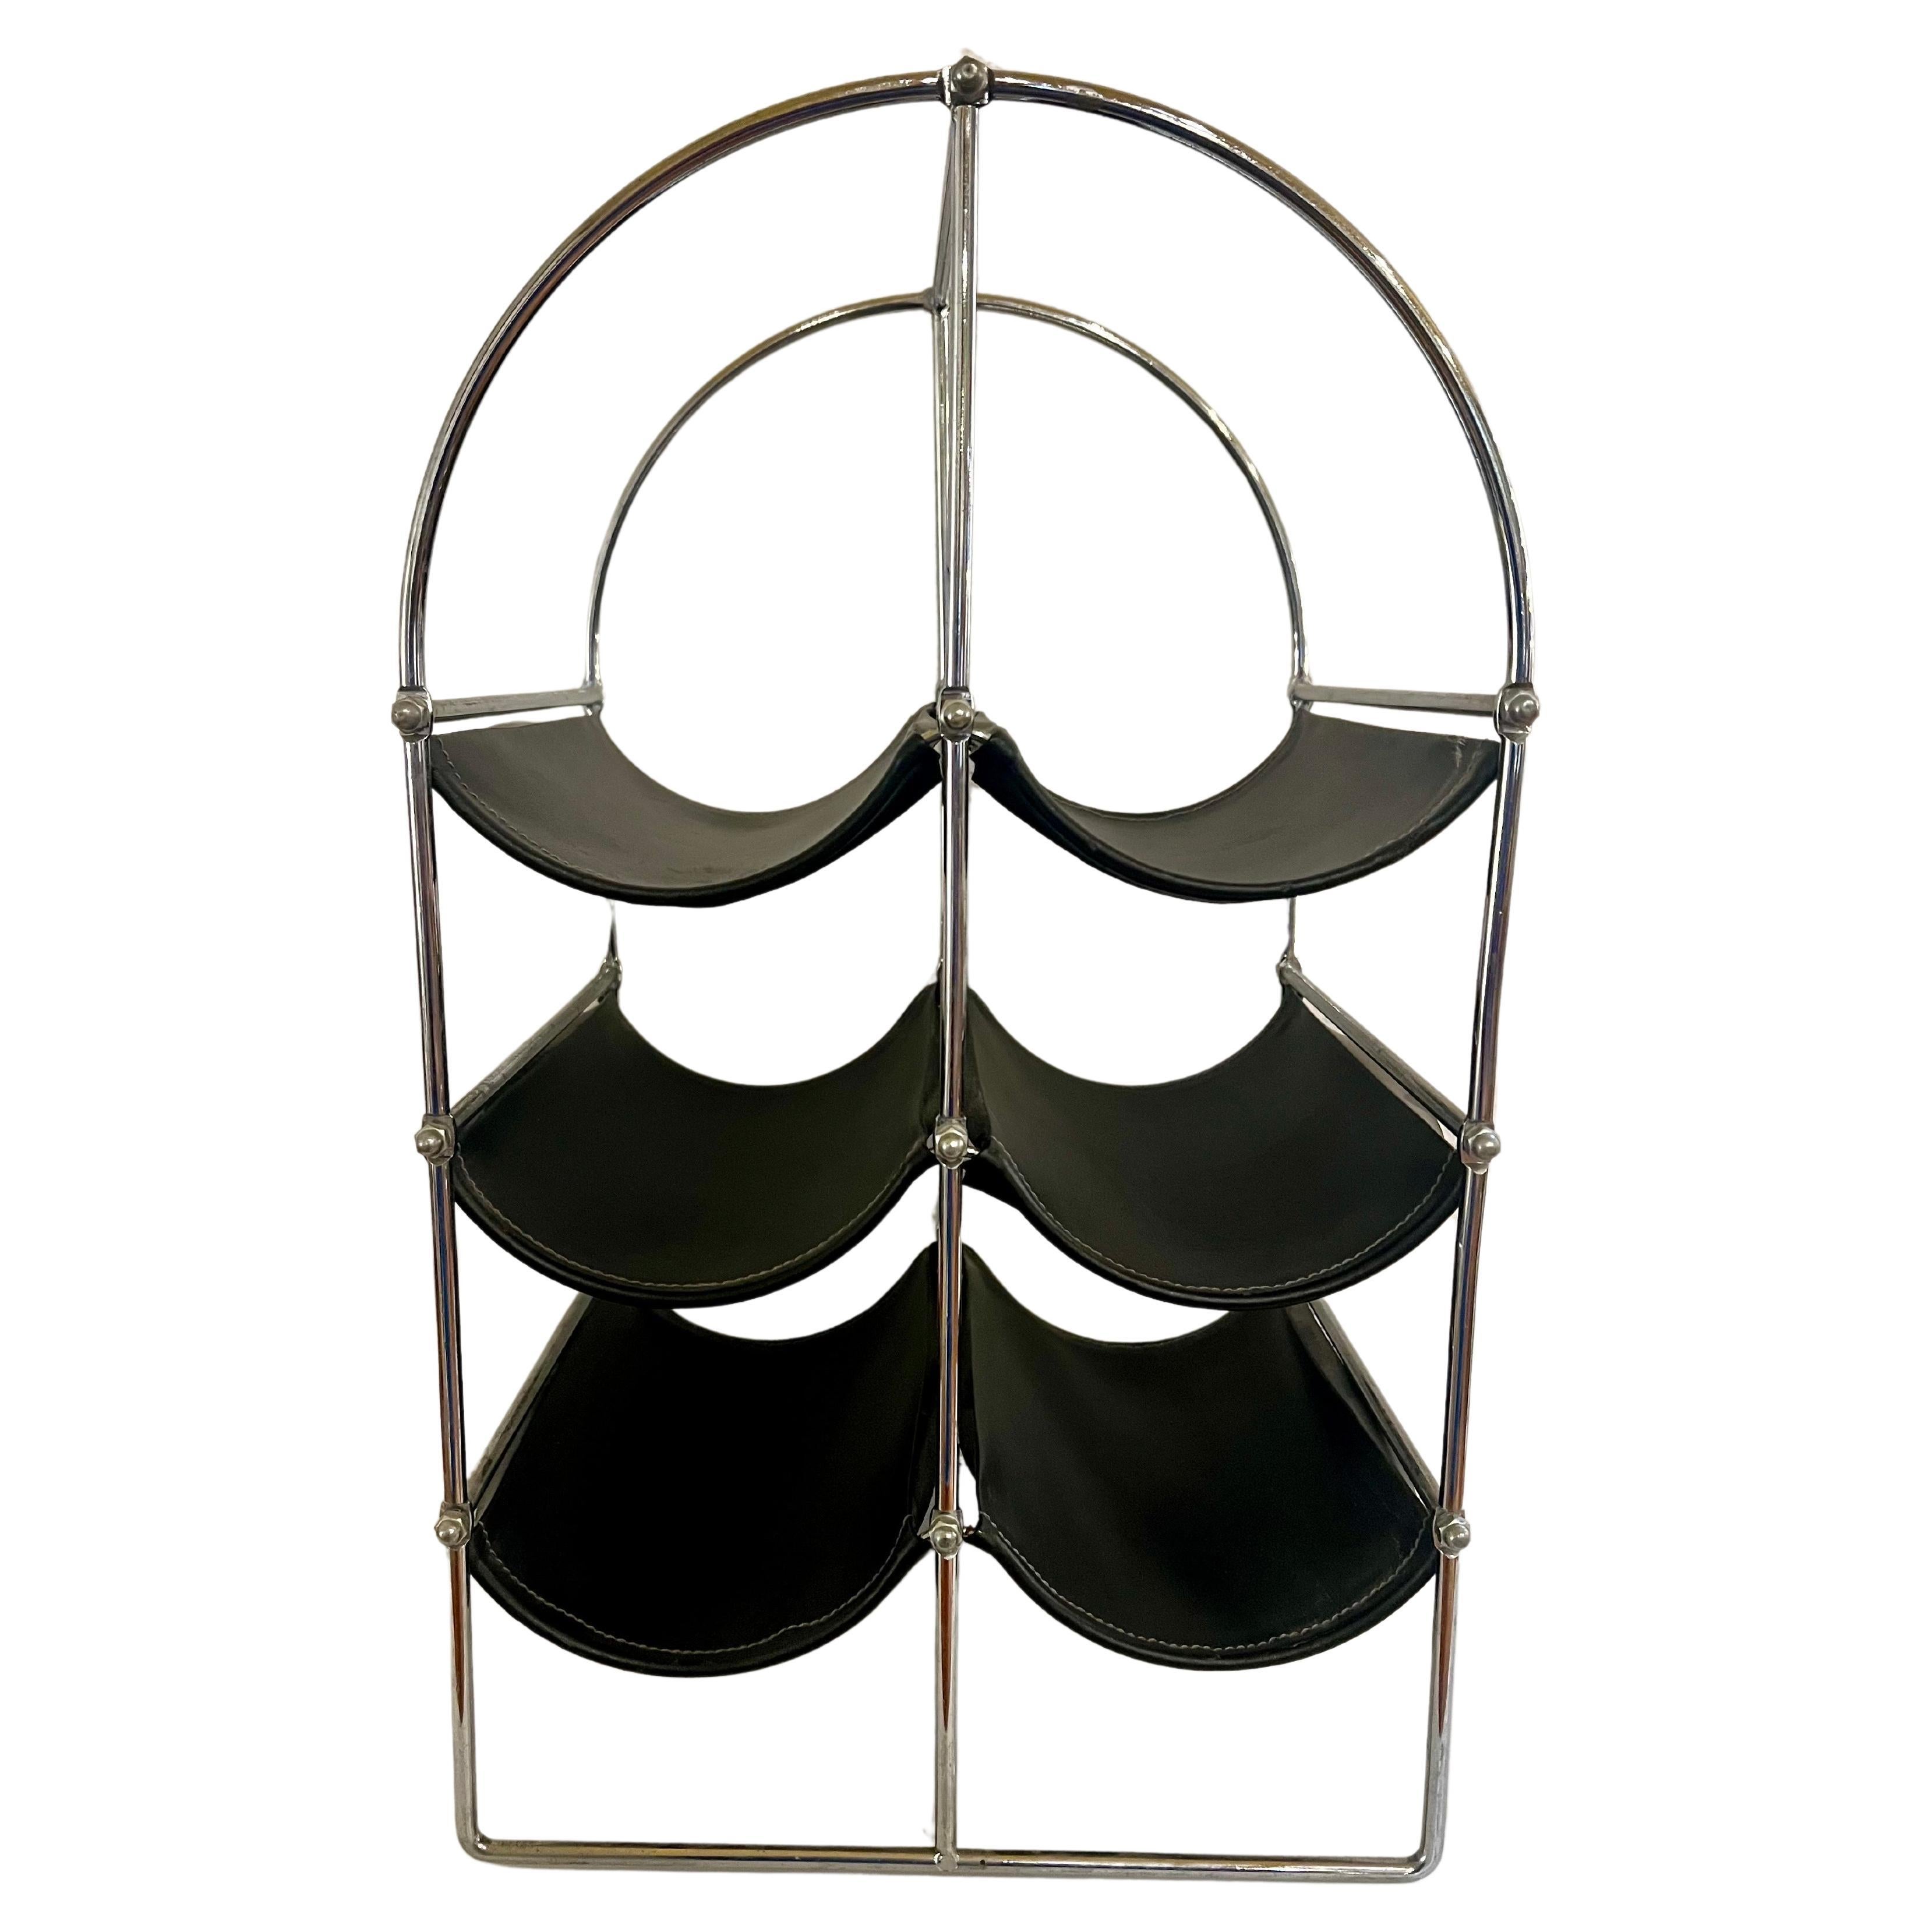 a practical minimalist chrome plated metal with Naugahyde beds for resting wine bottles, circa 1970's nice condition.